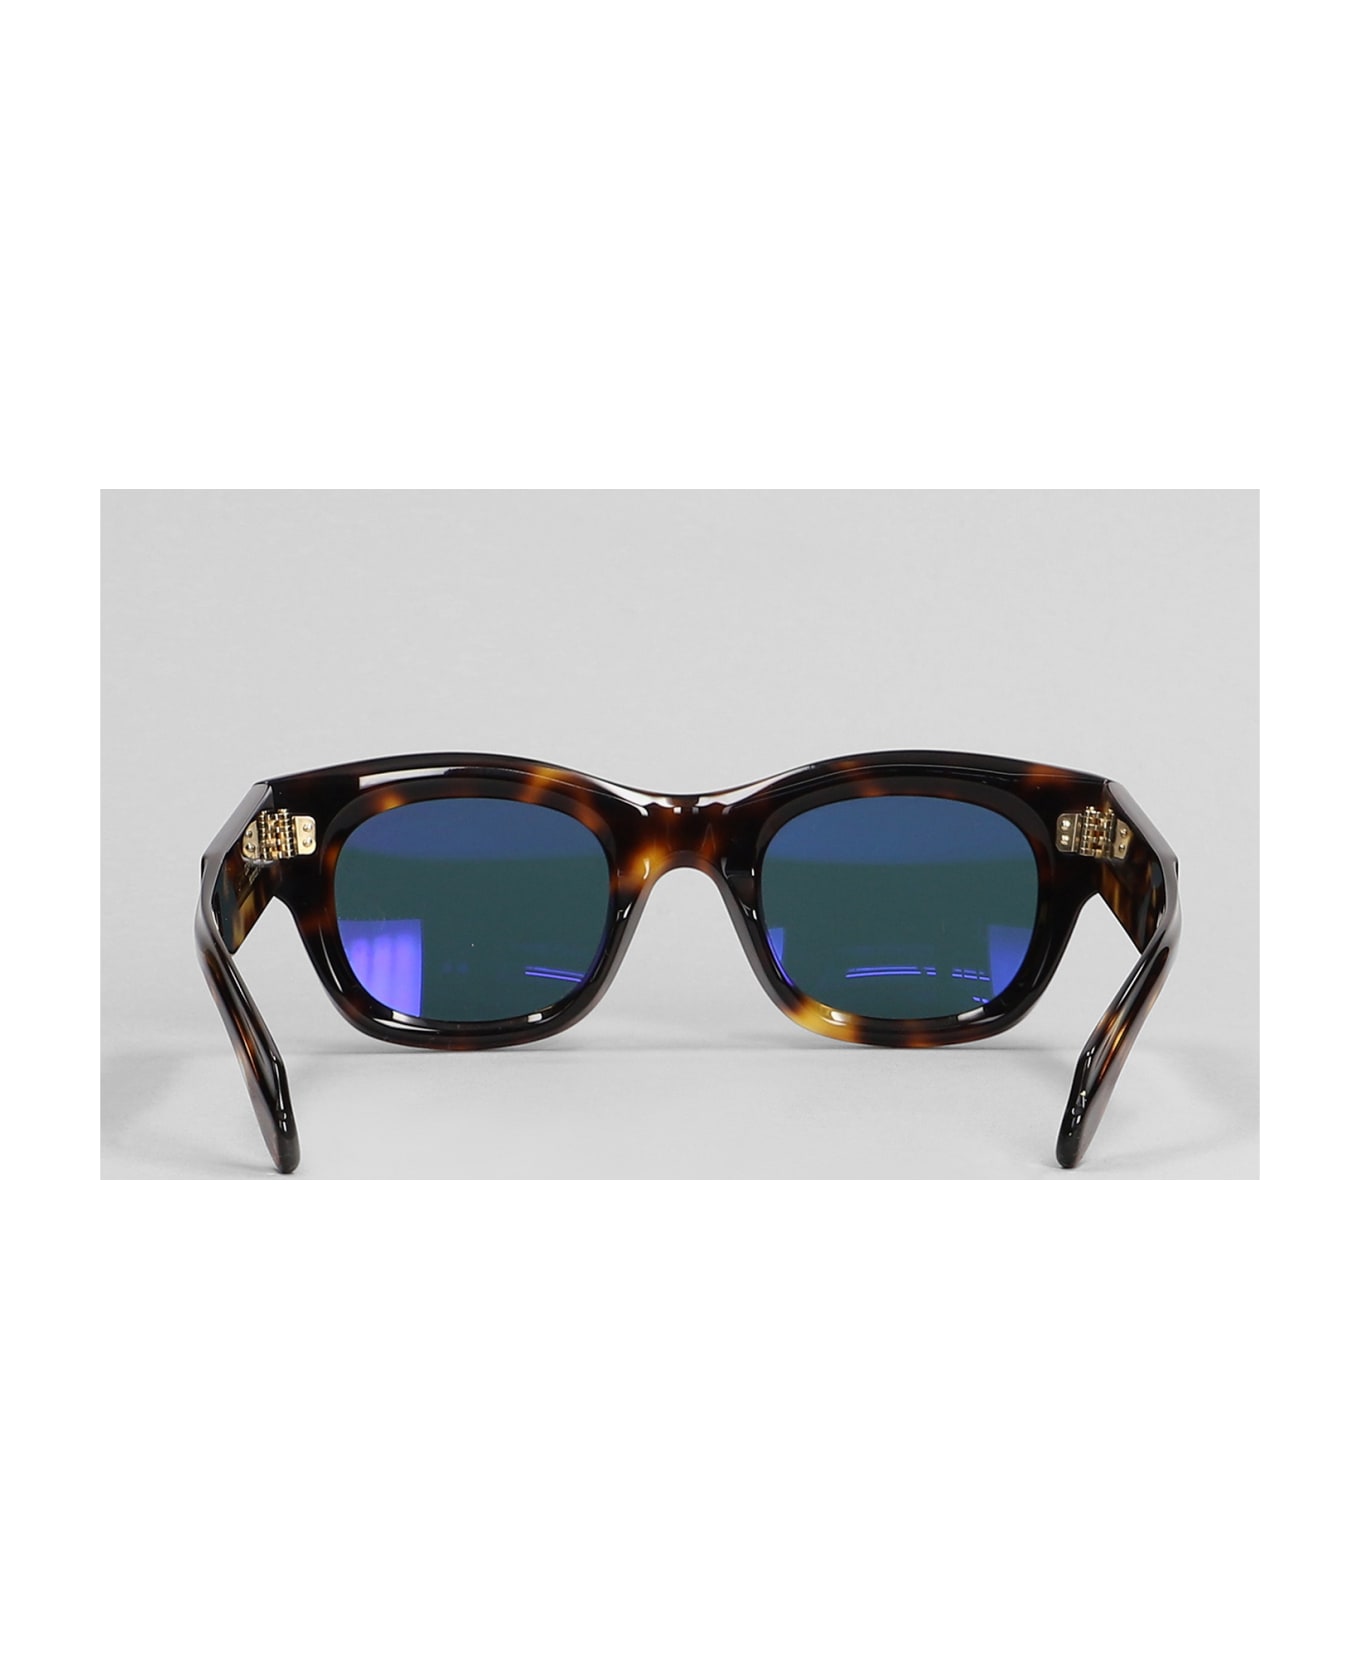 Cutler and Gross 9261 Sunglasses In Brown Acetate - brown